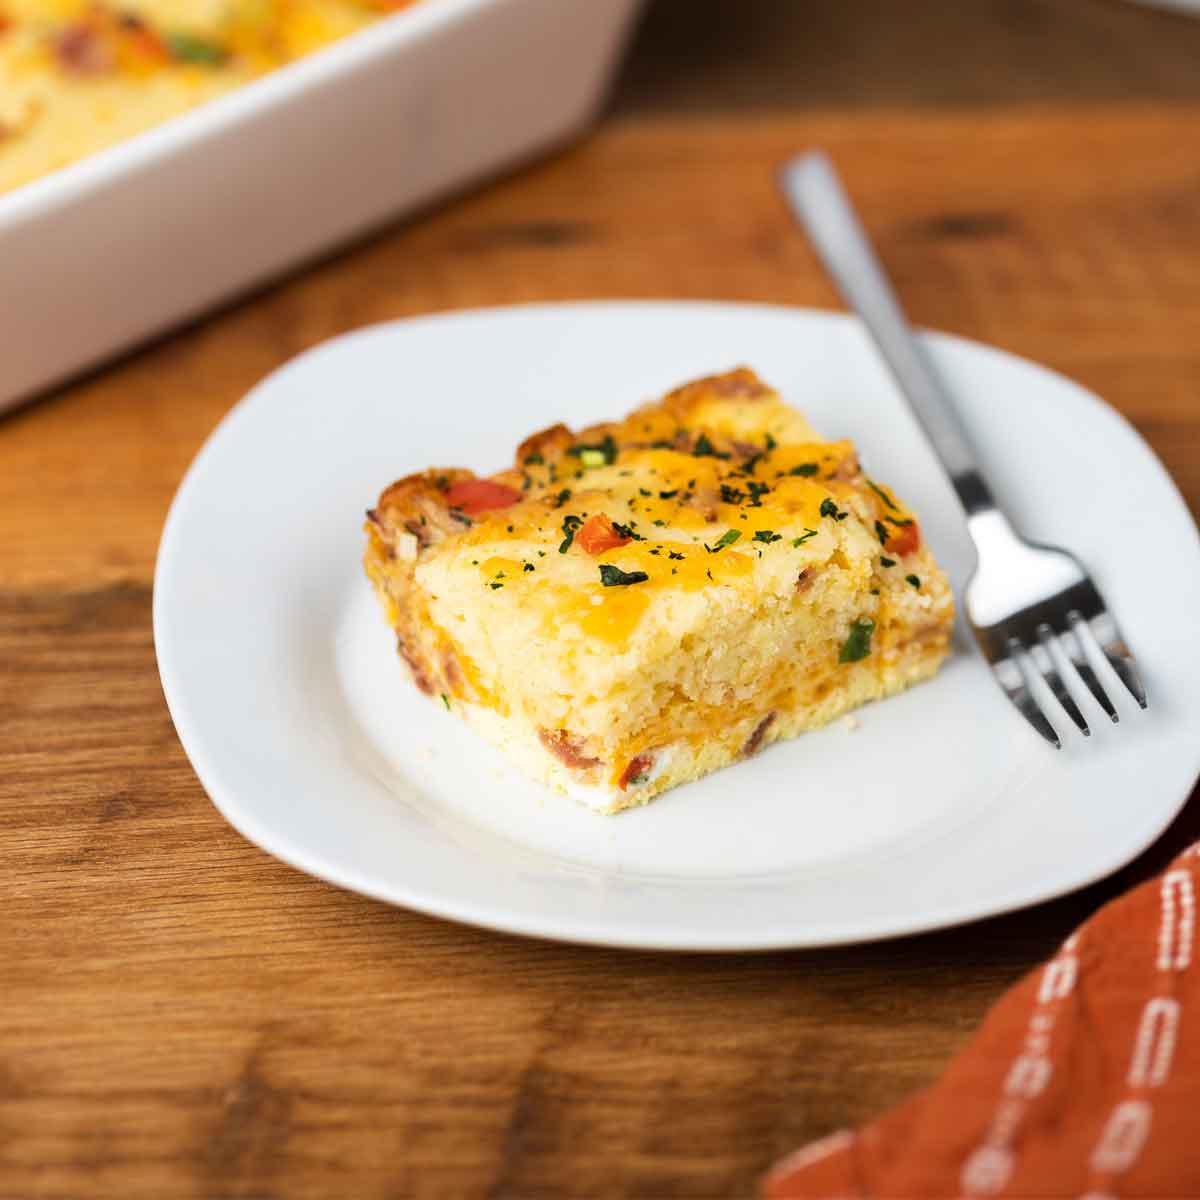 A slice of Breakfast Casserole on a plate with a fork.